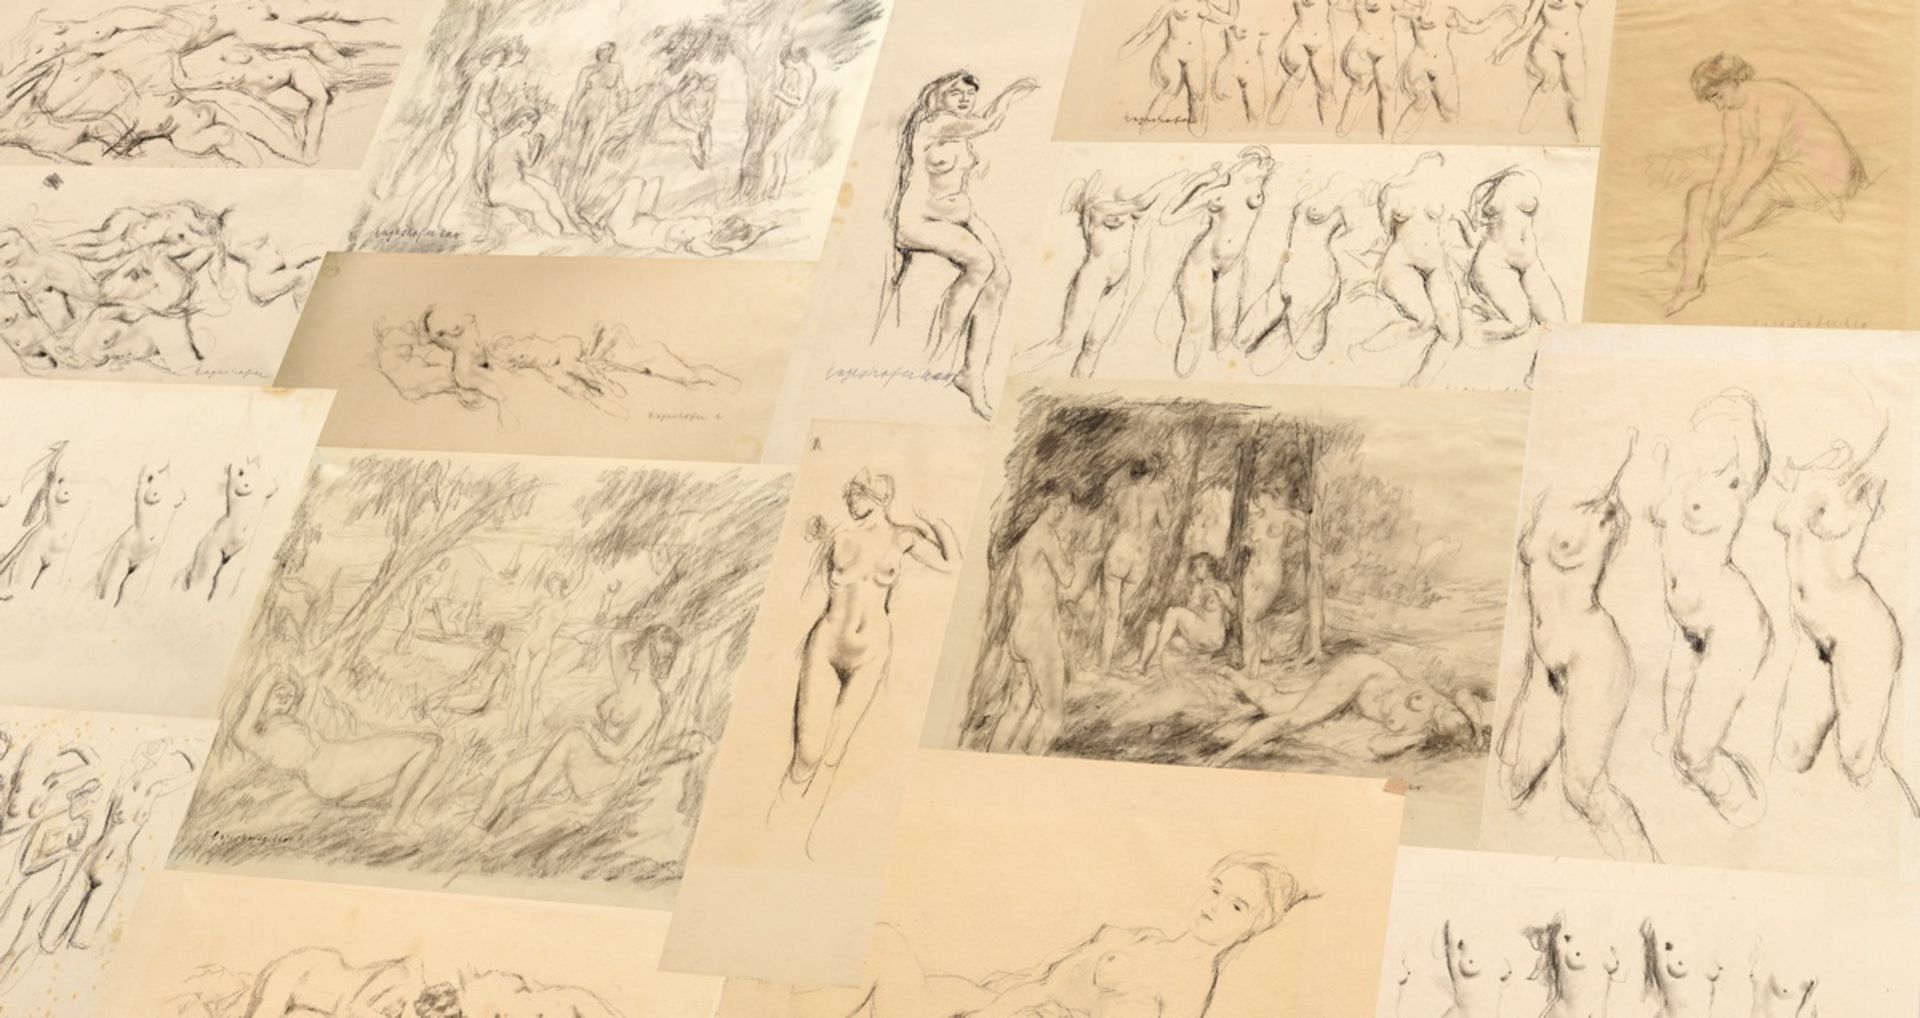 17 Mayershofer, Max (1875-1950) "Female nude drawings", charcoal, each sign., each mounted in passe